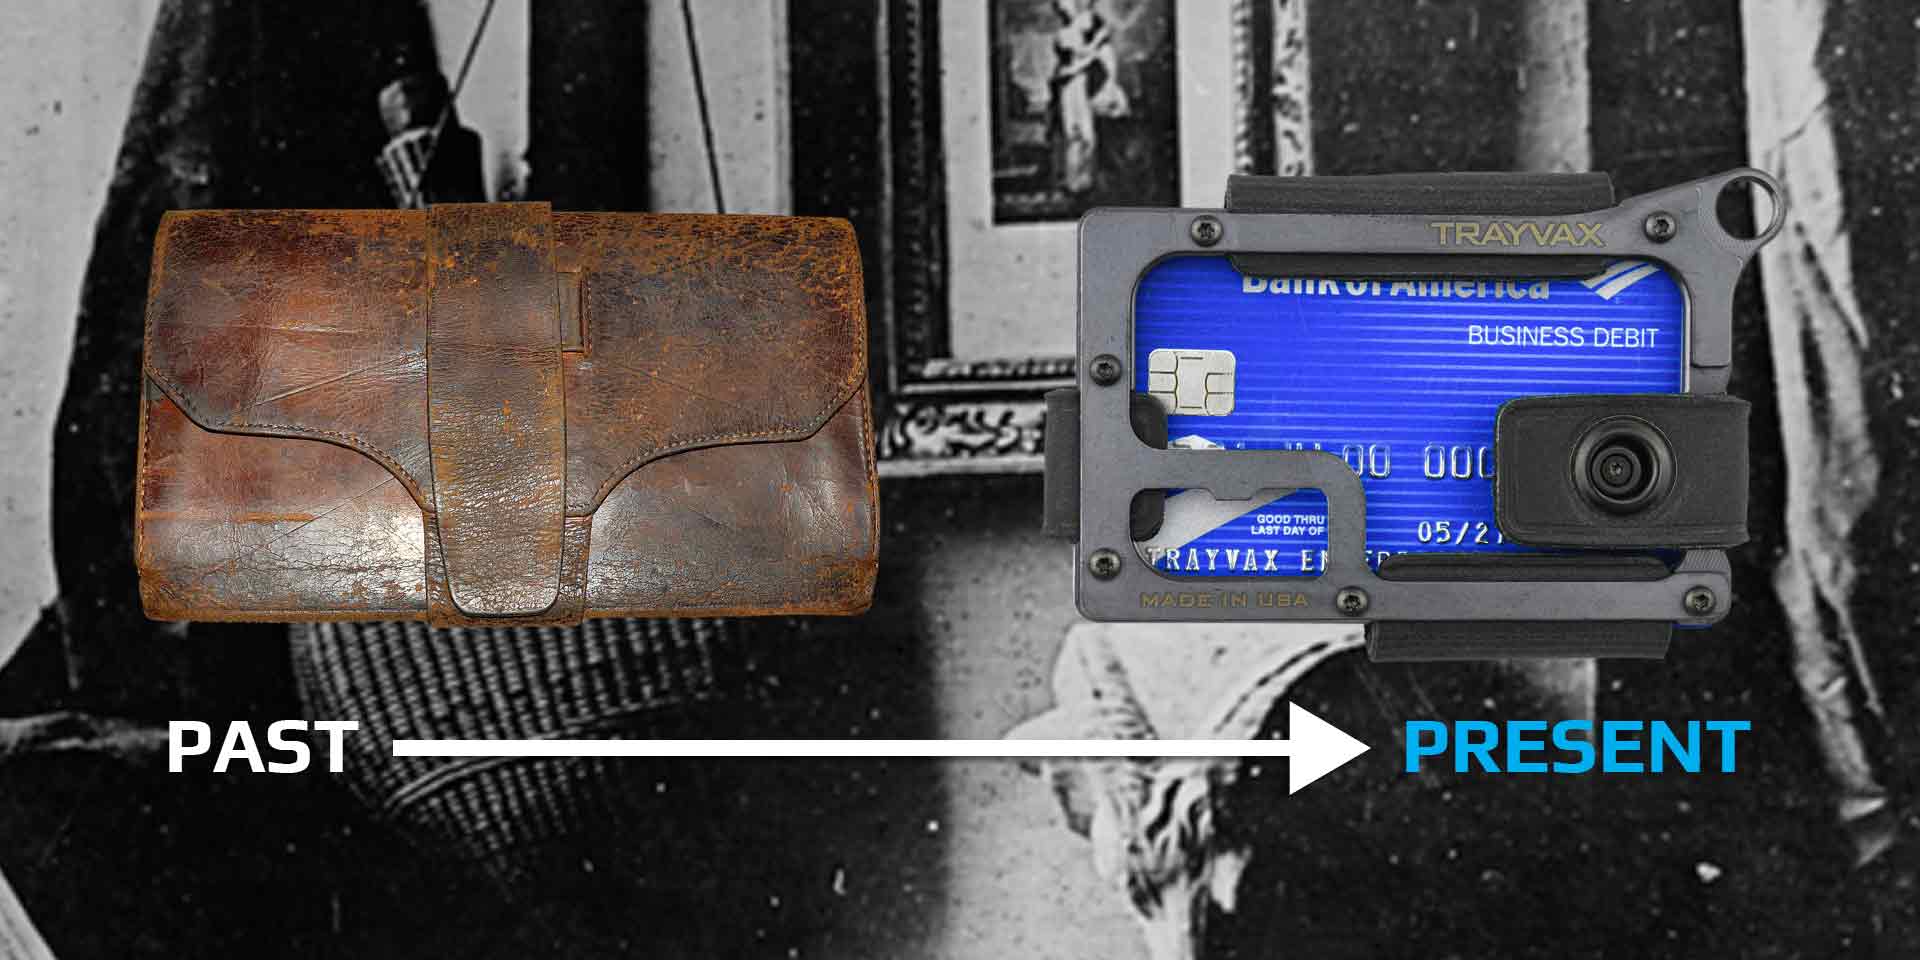 Showing an old wallet laying next to the Trayvax Contour